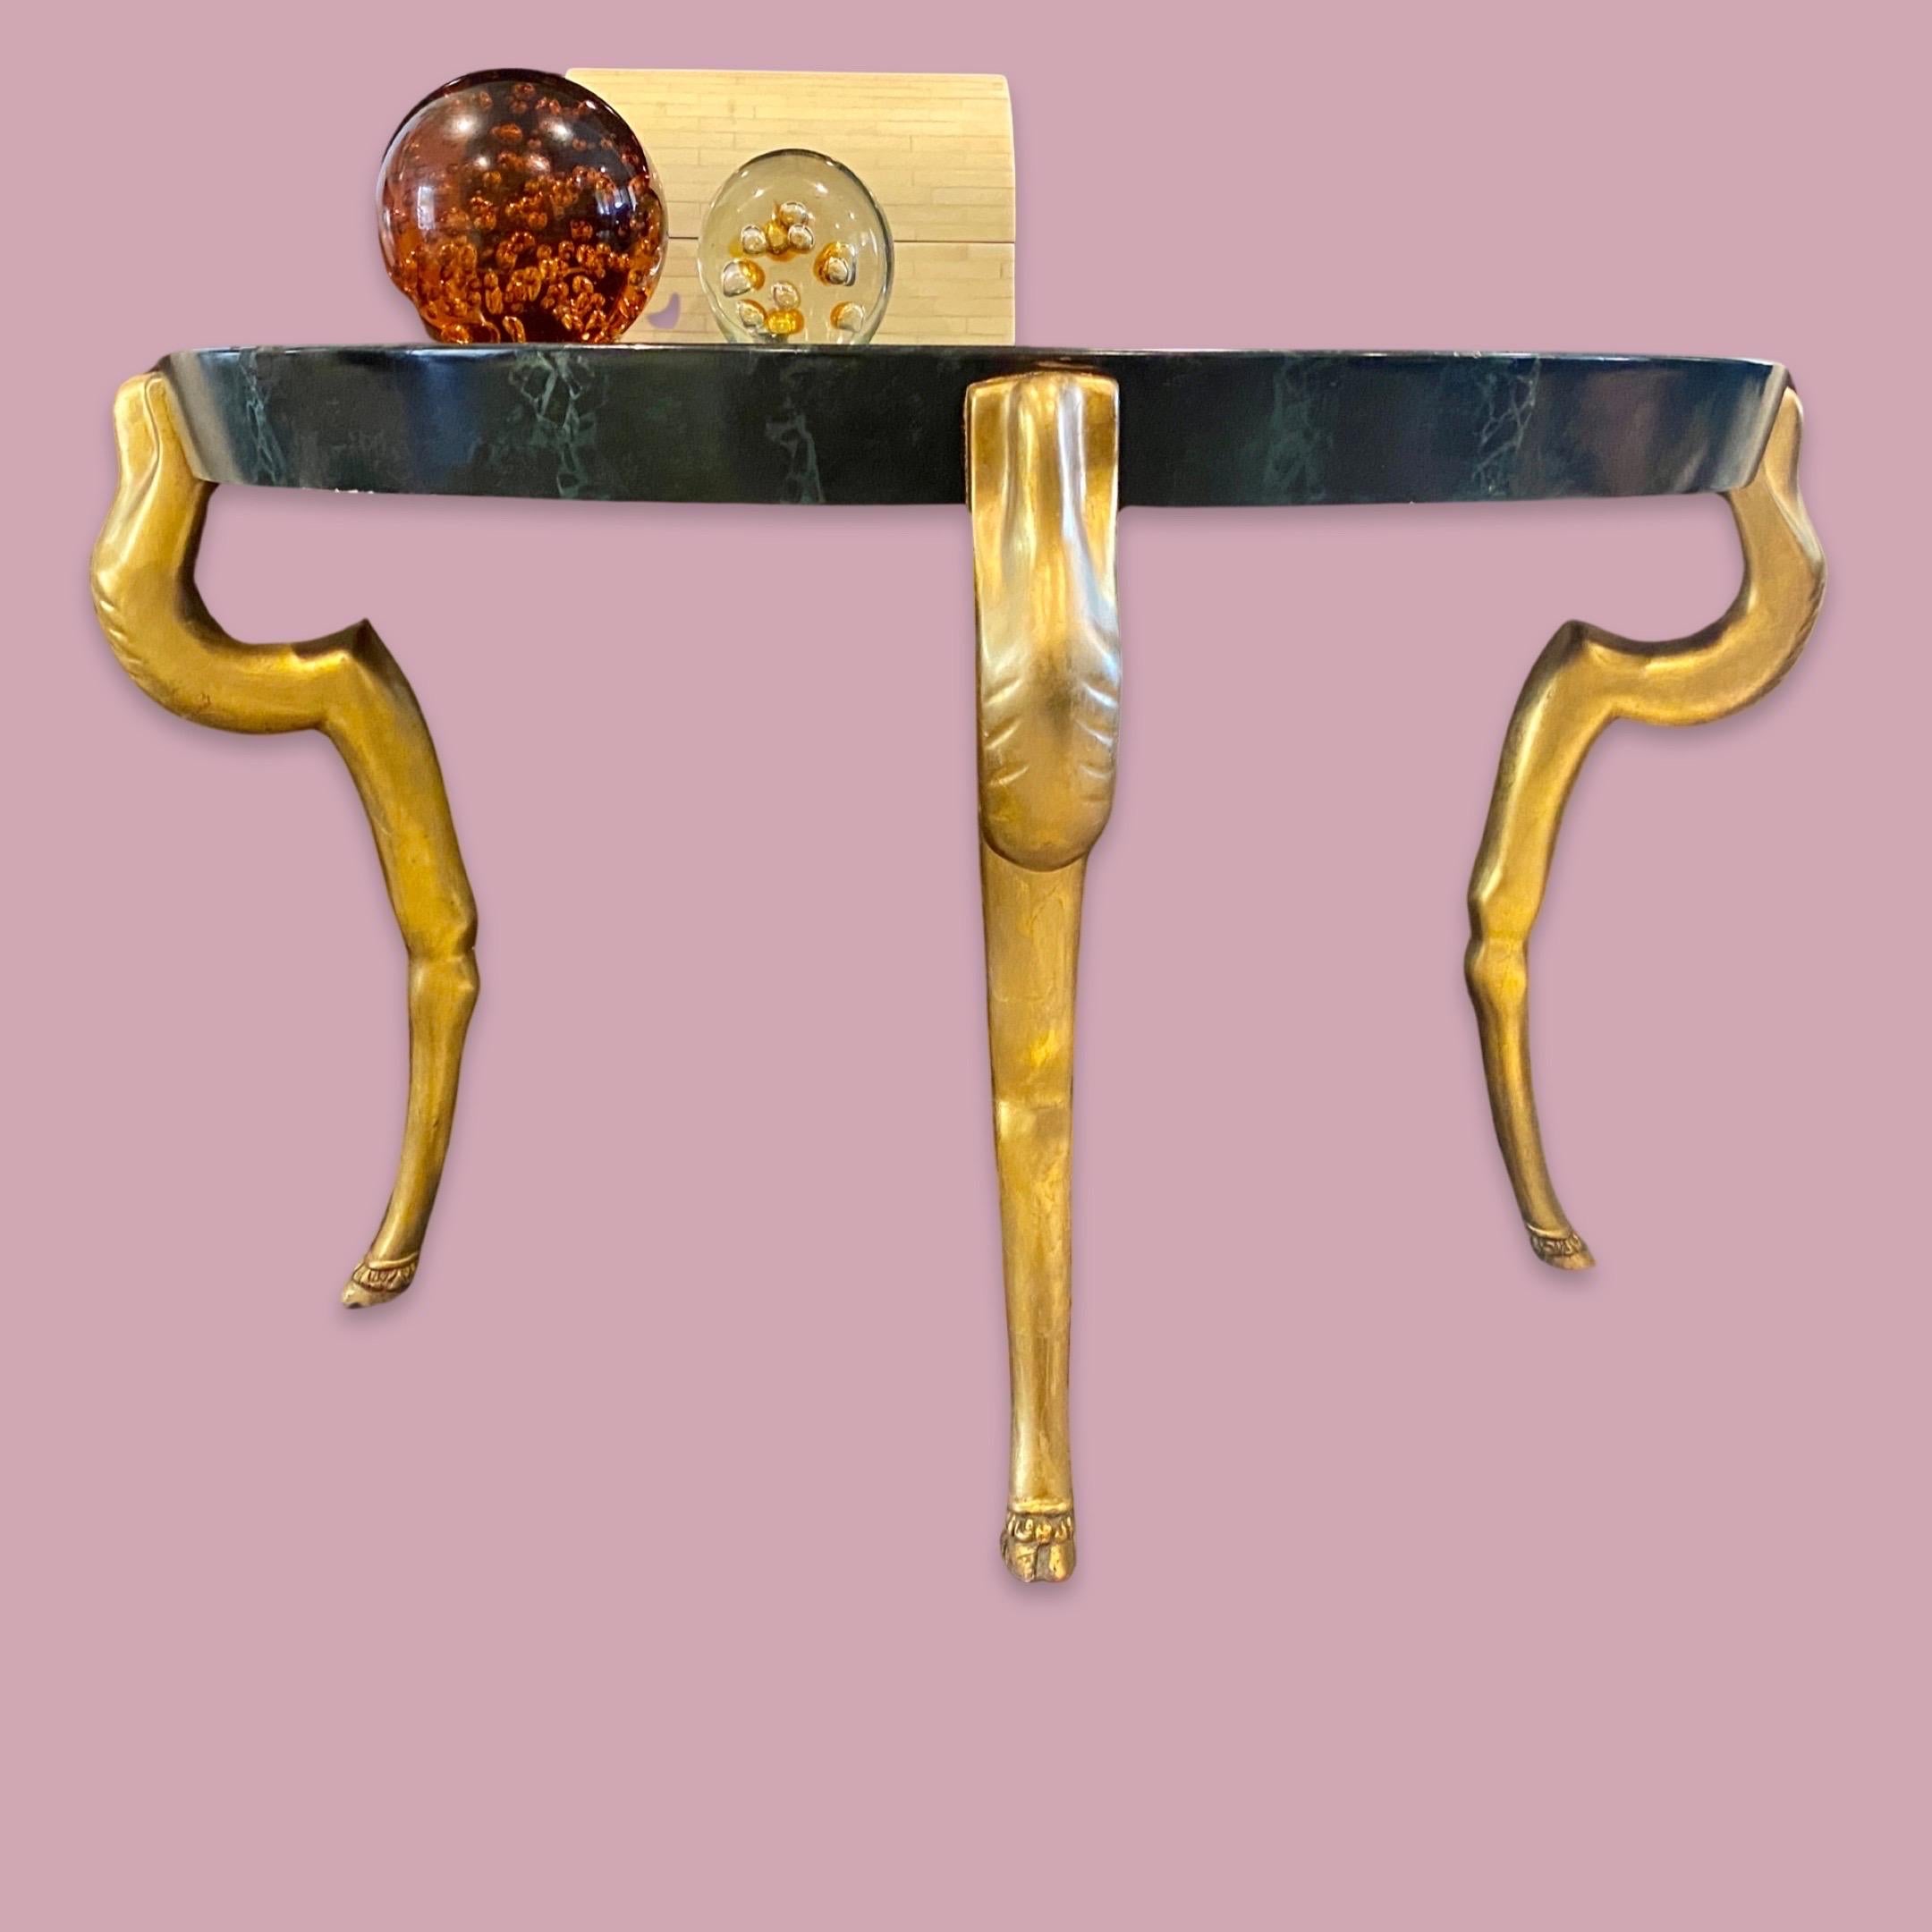 Demilune Console Gold Leaf Hoof Legs/Hand-Painted Marble Top Manner of Duquette In Good Condition For Sale In Palm Springs, CA